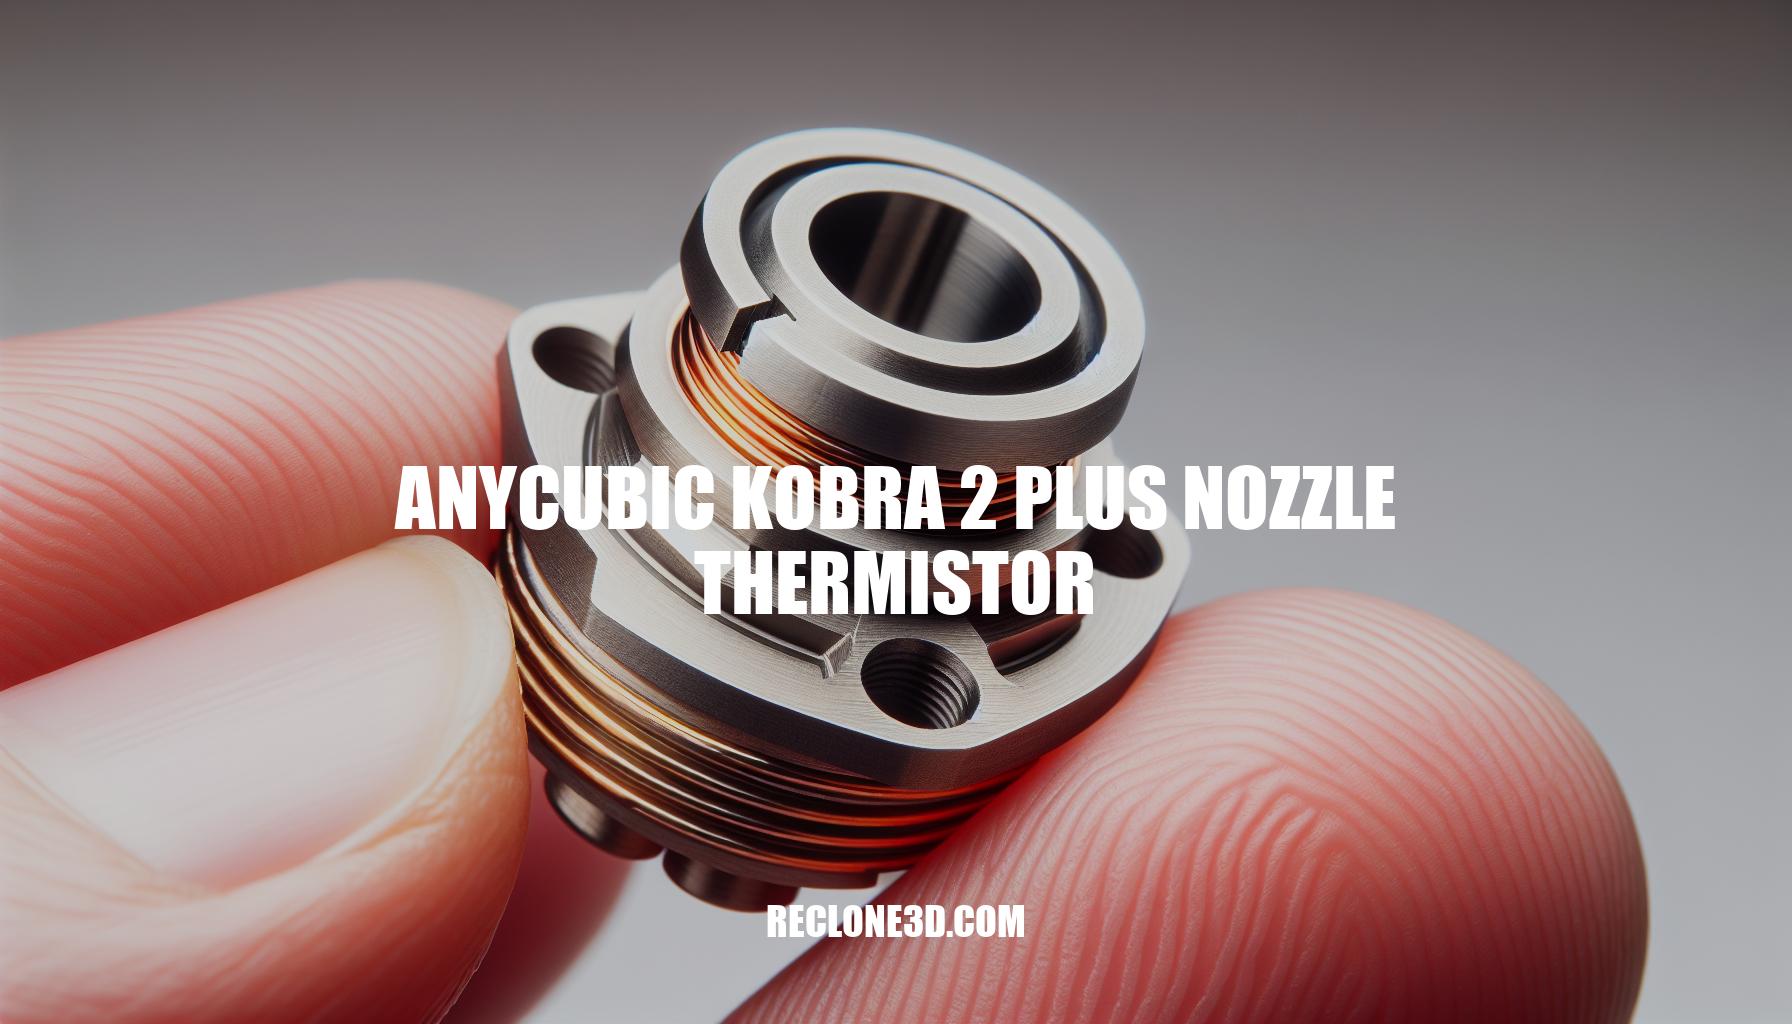 Ultimate Guide to Anycubic Kobra 2 Plus Nozzle Thermistor